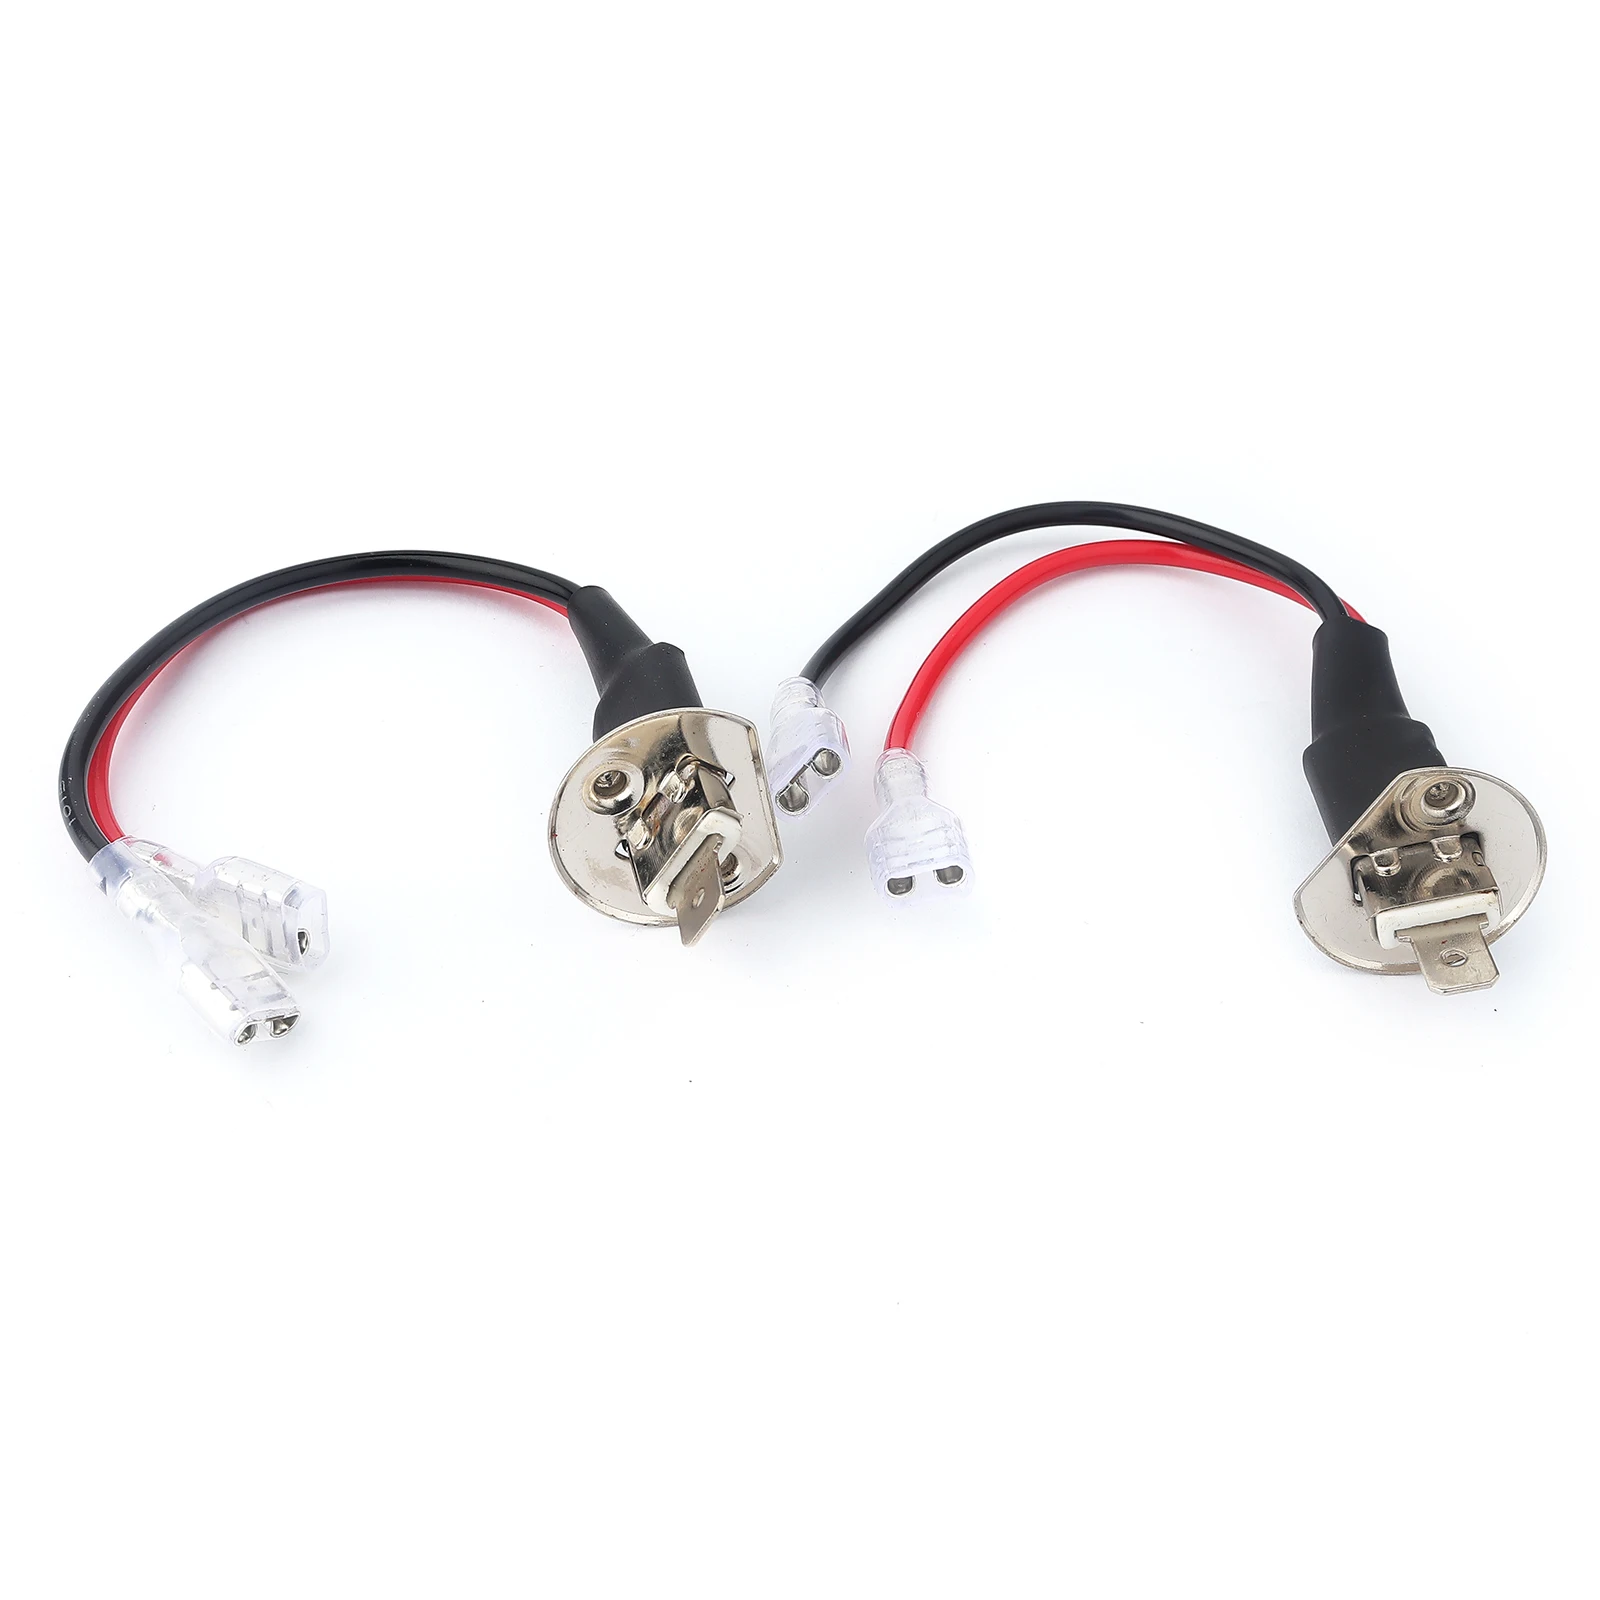  DAMA H1 Female to Single Diode Male Socket Wire Harness  Extension Connectors for LED HID Headlights Bulb Retrofit, Durable  Extension Wire Harnesses 12 ga. 18 AWG